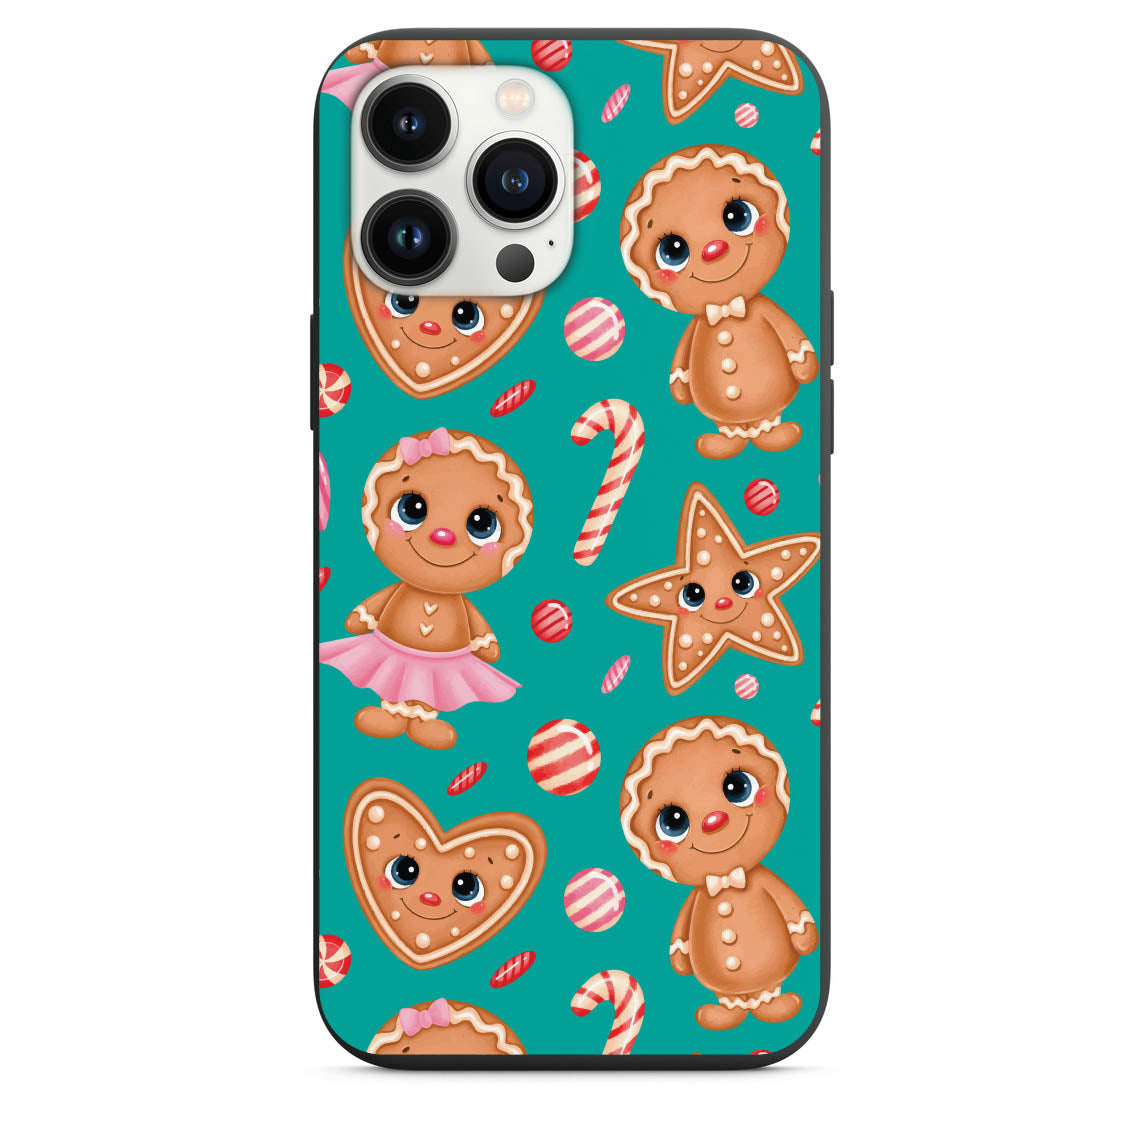 Cute Gingerbread Girl and Boy Cookies Design Phone Case for iPhone 7 8 X XS XR SE 11 12 13 14 Pro Max Mini Note s10 s10plus s20 s21 20plus